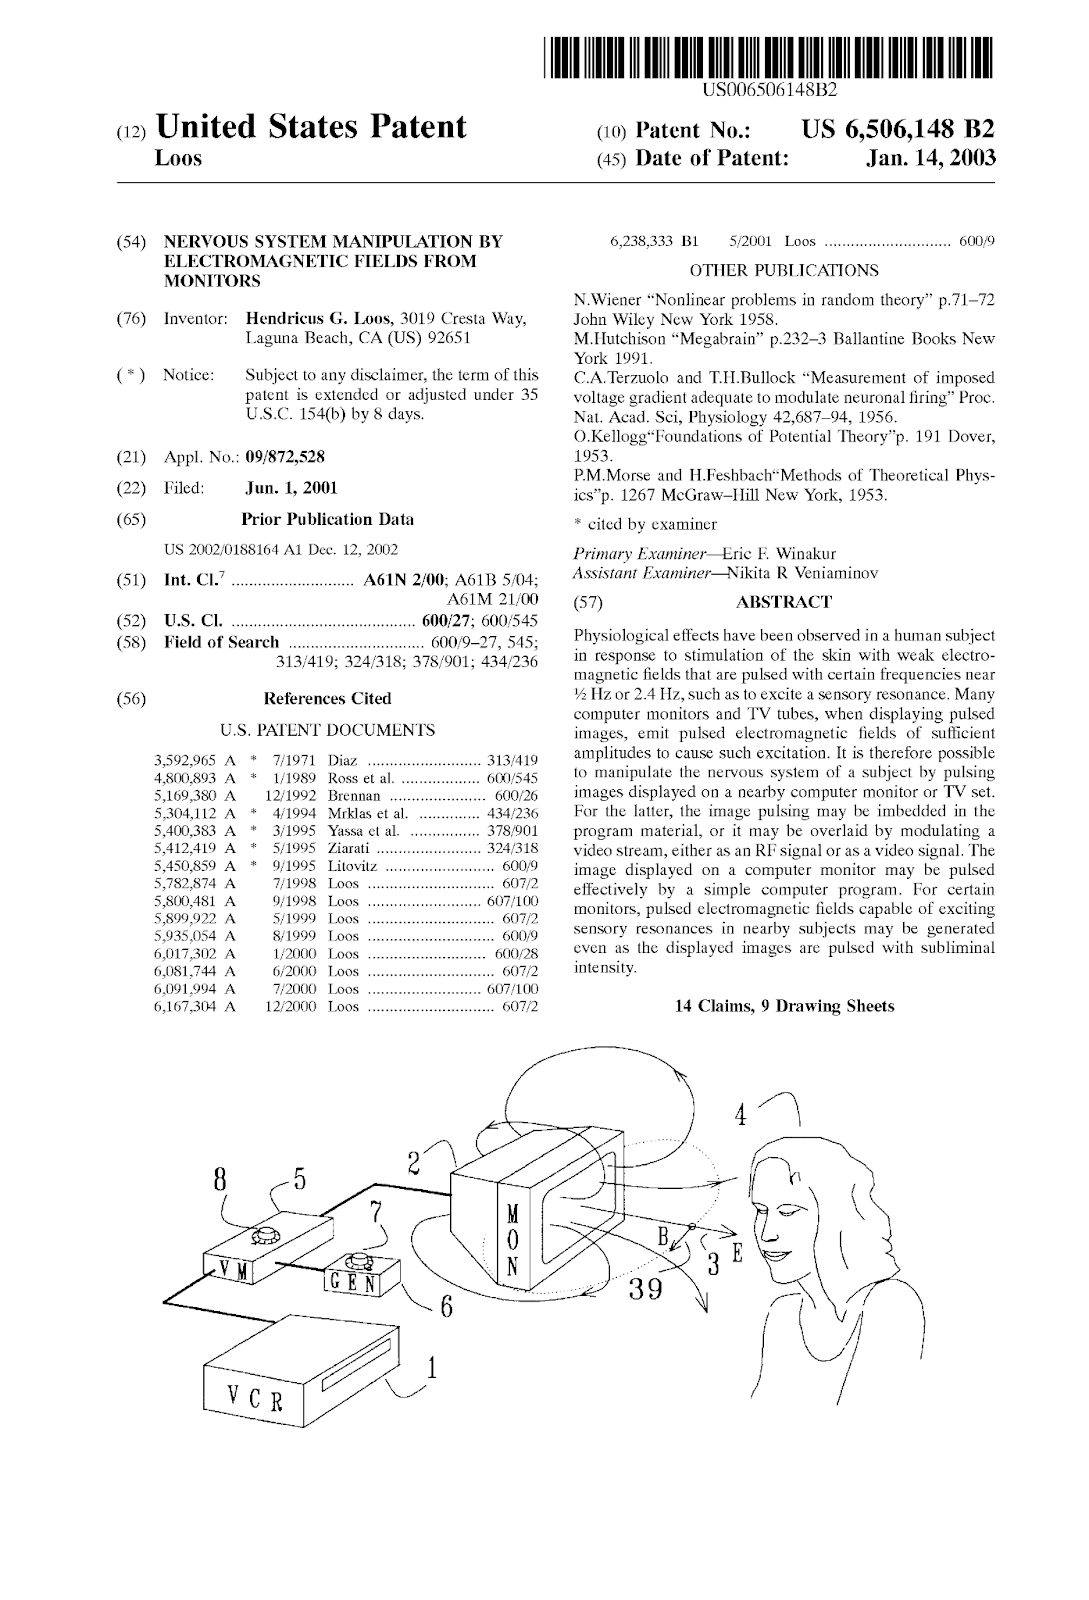 US Patent 6506148 B2: Abstract